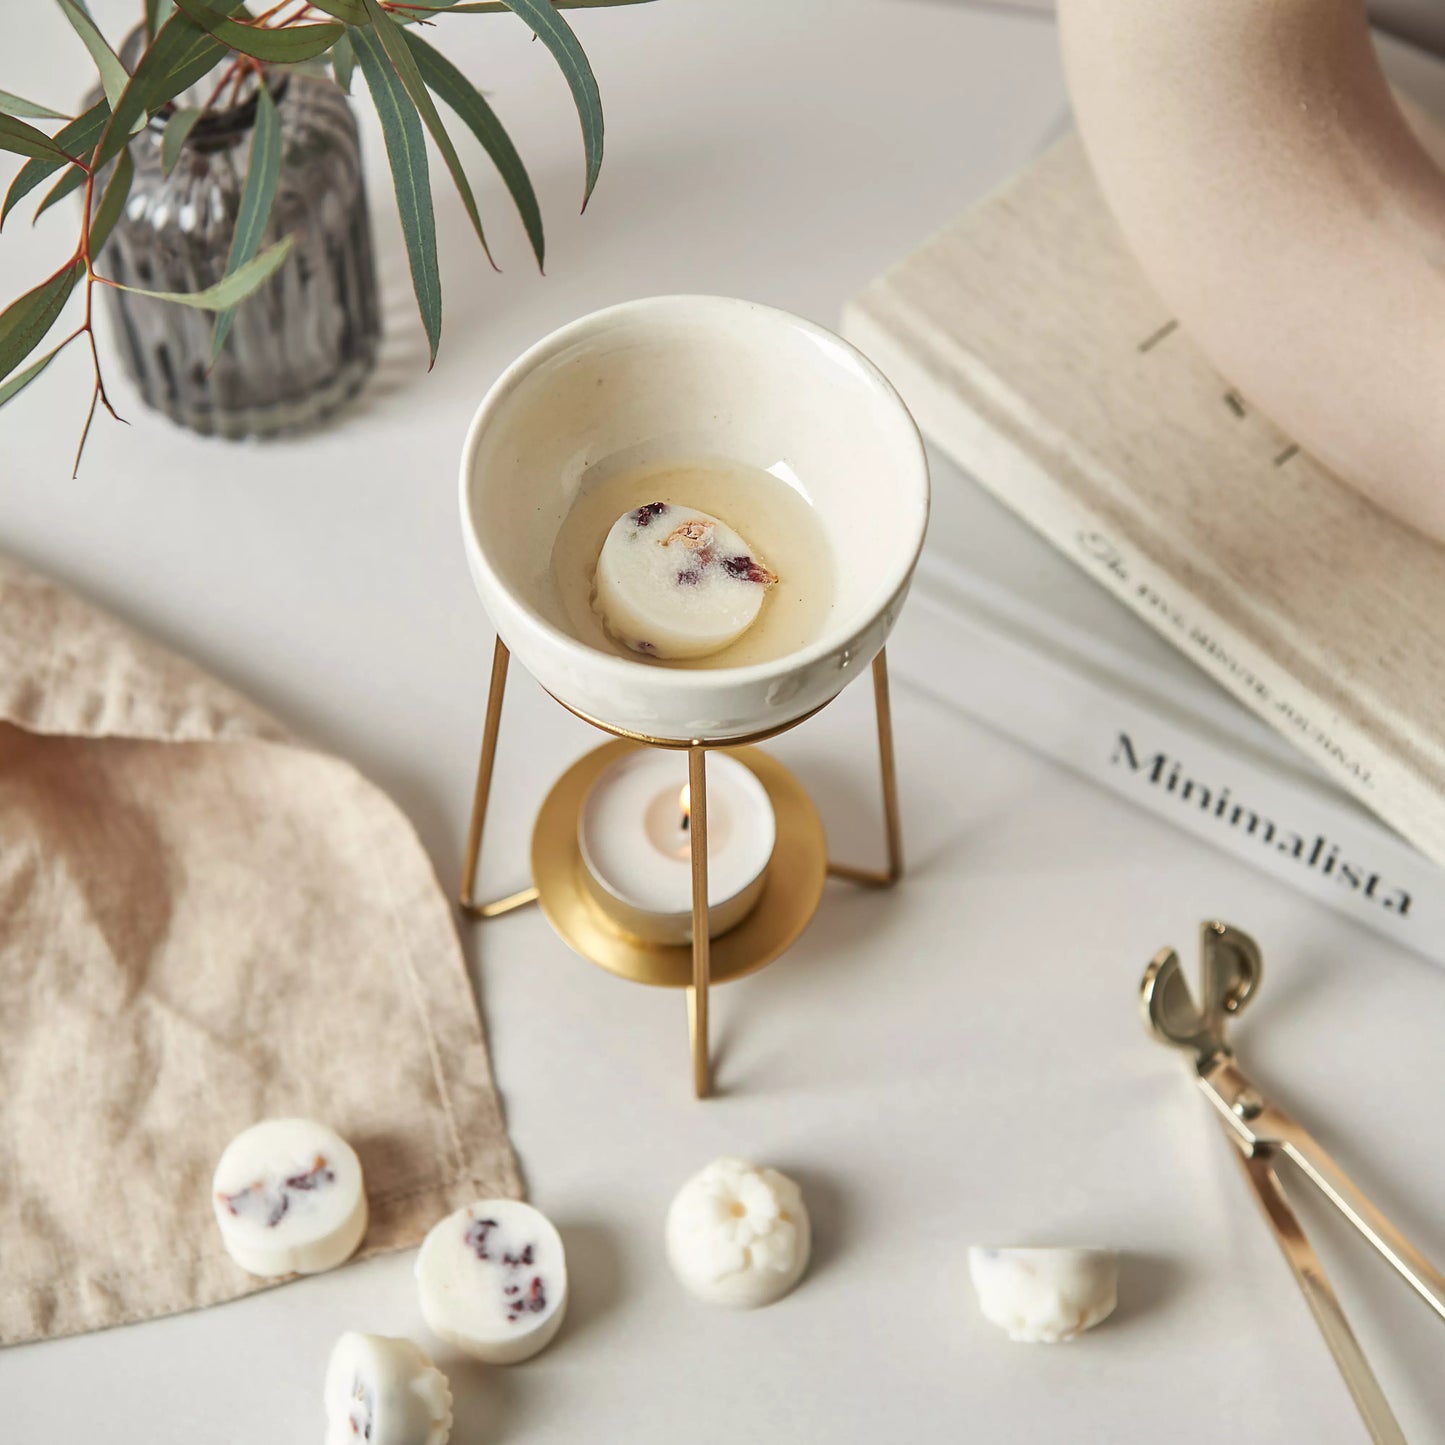 Our Enchanted Forest Wax Melts slowly melt in our bronze wax warmer, heated by a tea light beneath it.